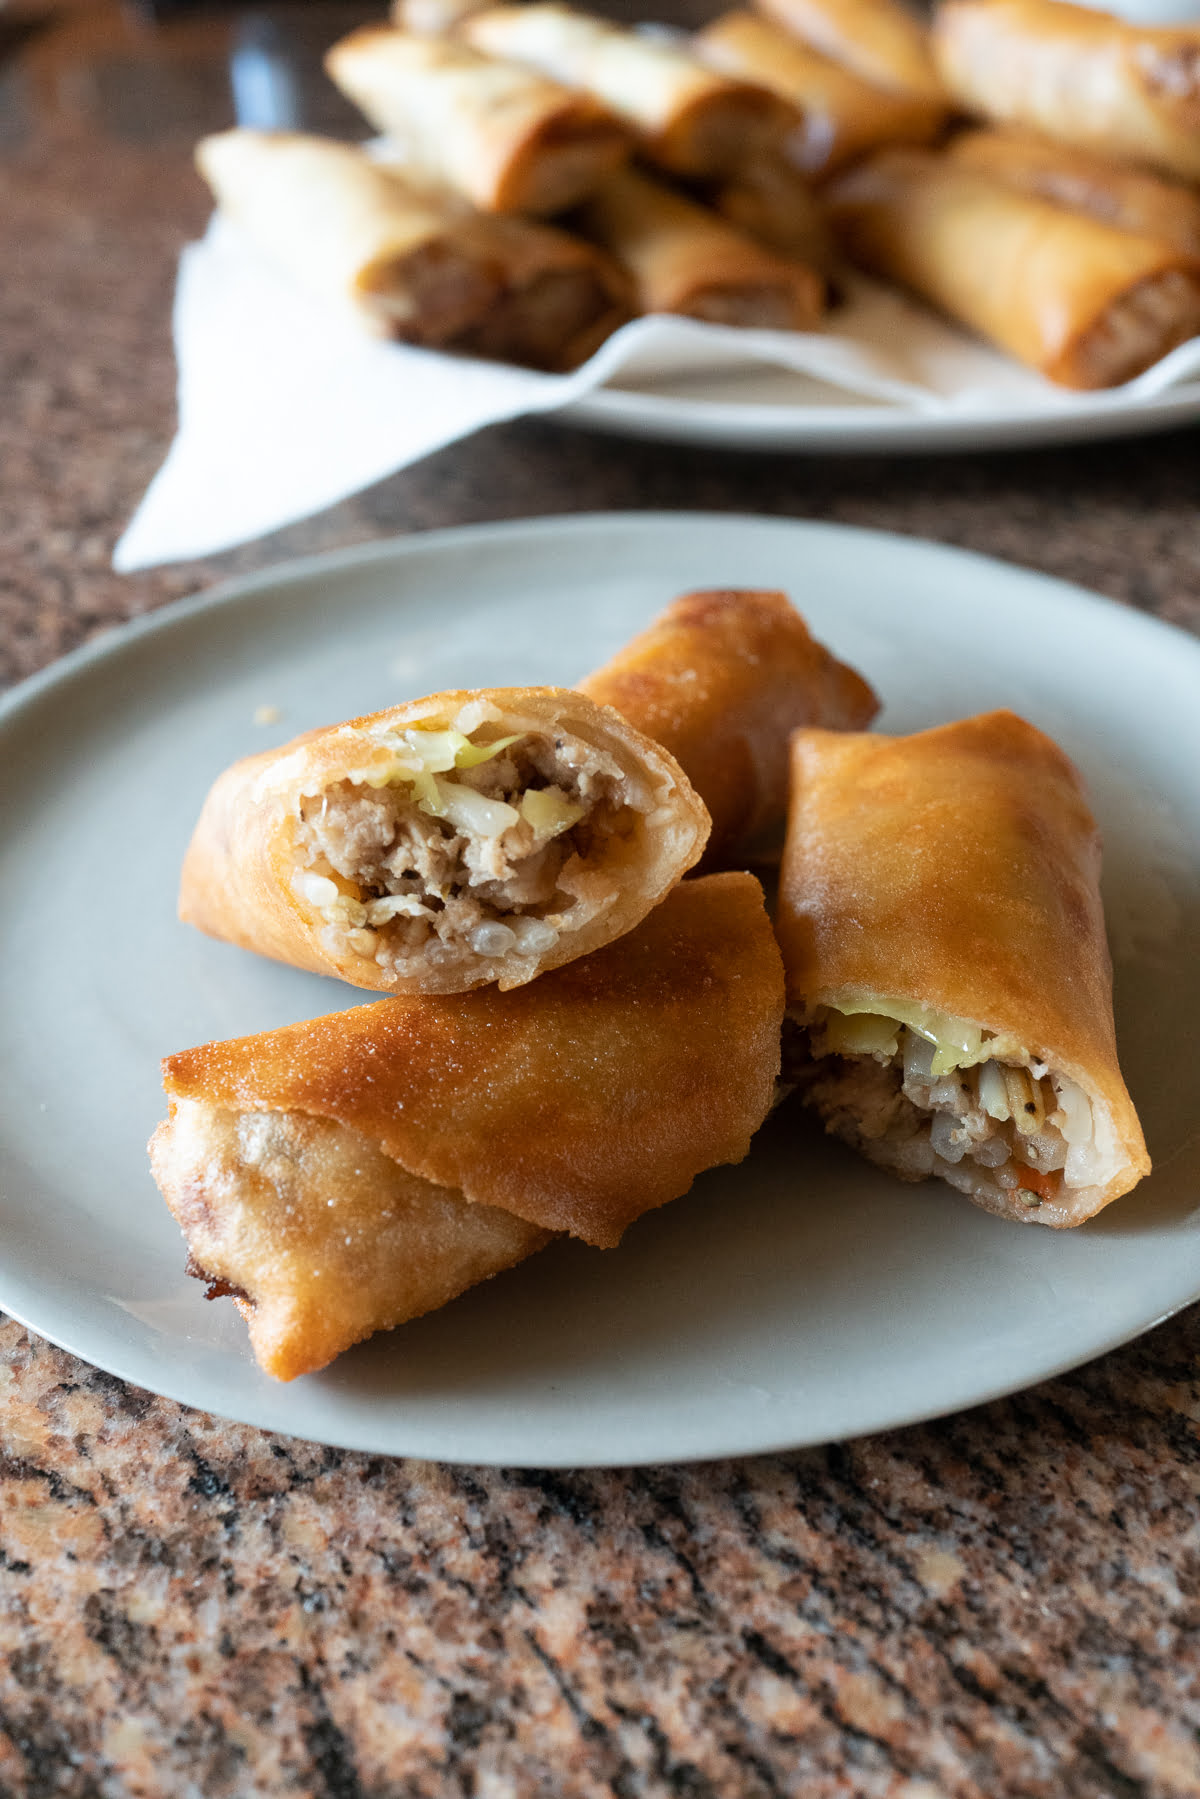 Freshly fried lumpia, cut in half and plated.